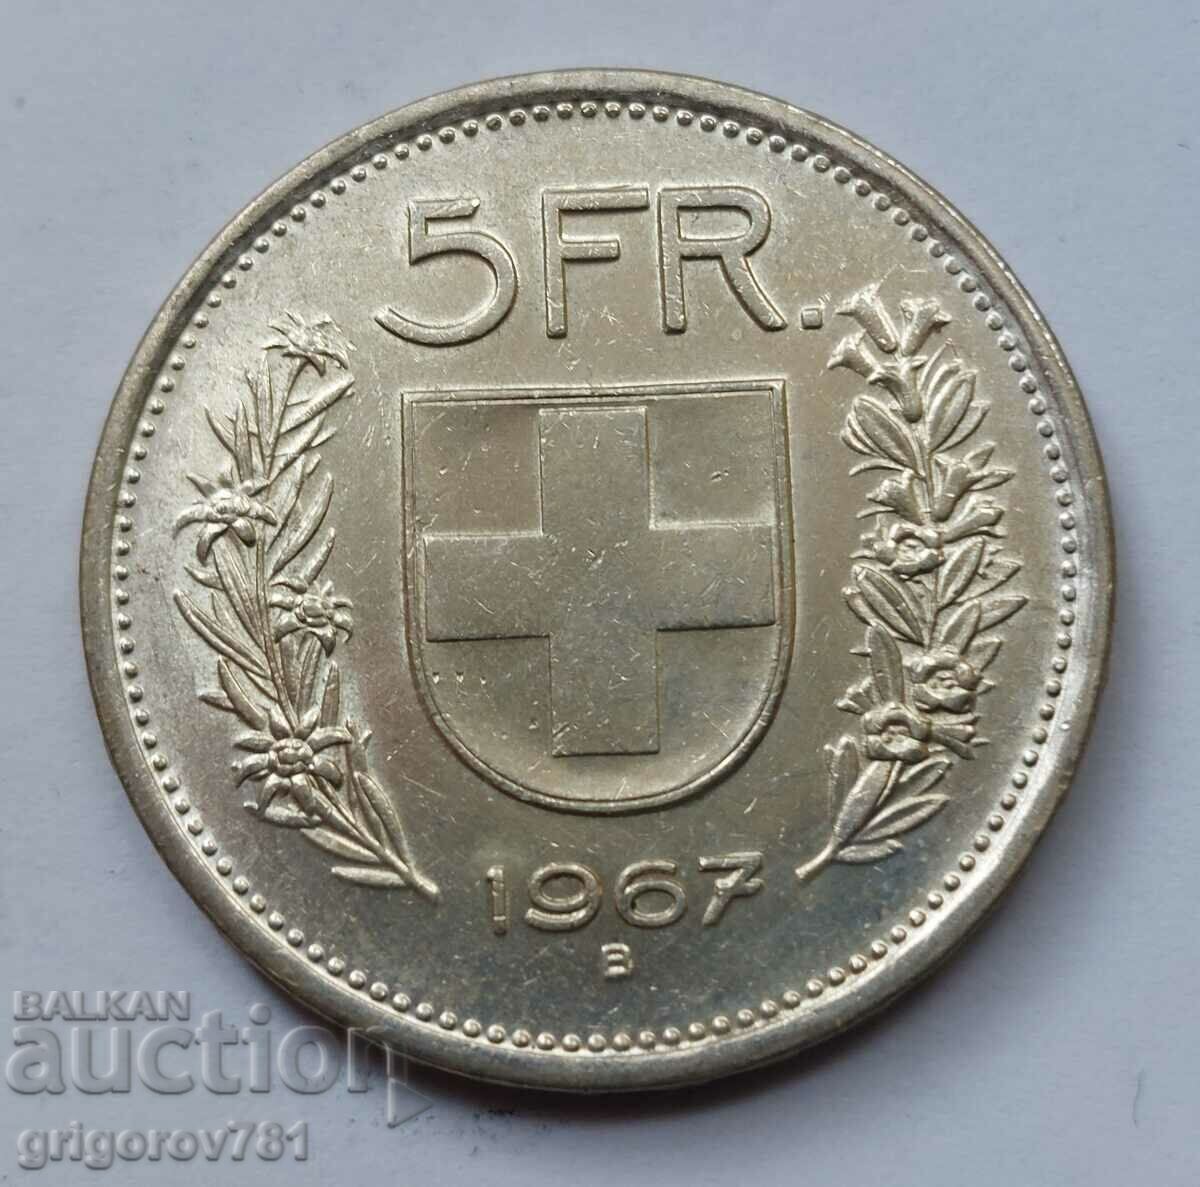 5 Francs Silver Switzerland 1967 B - Silver Coin #12